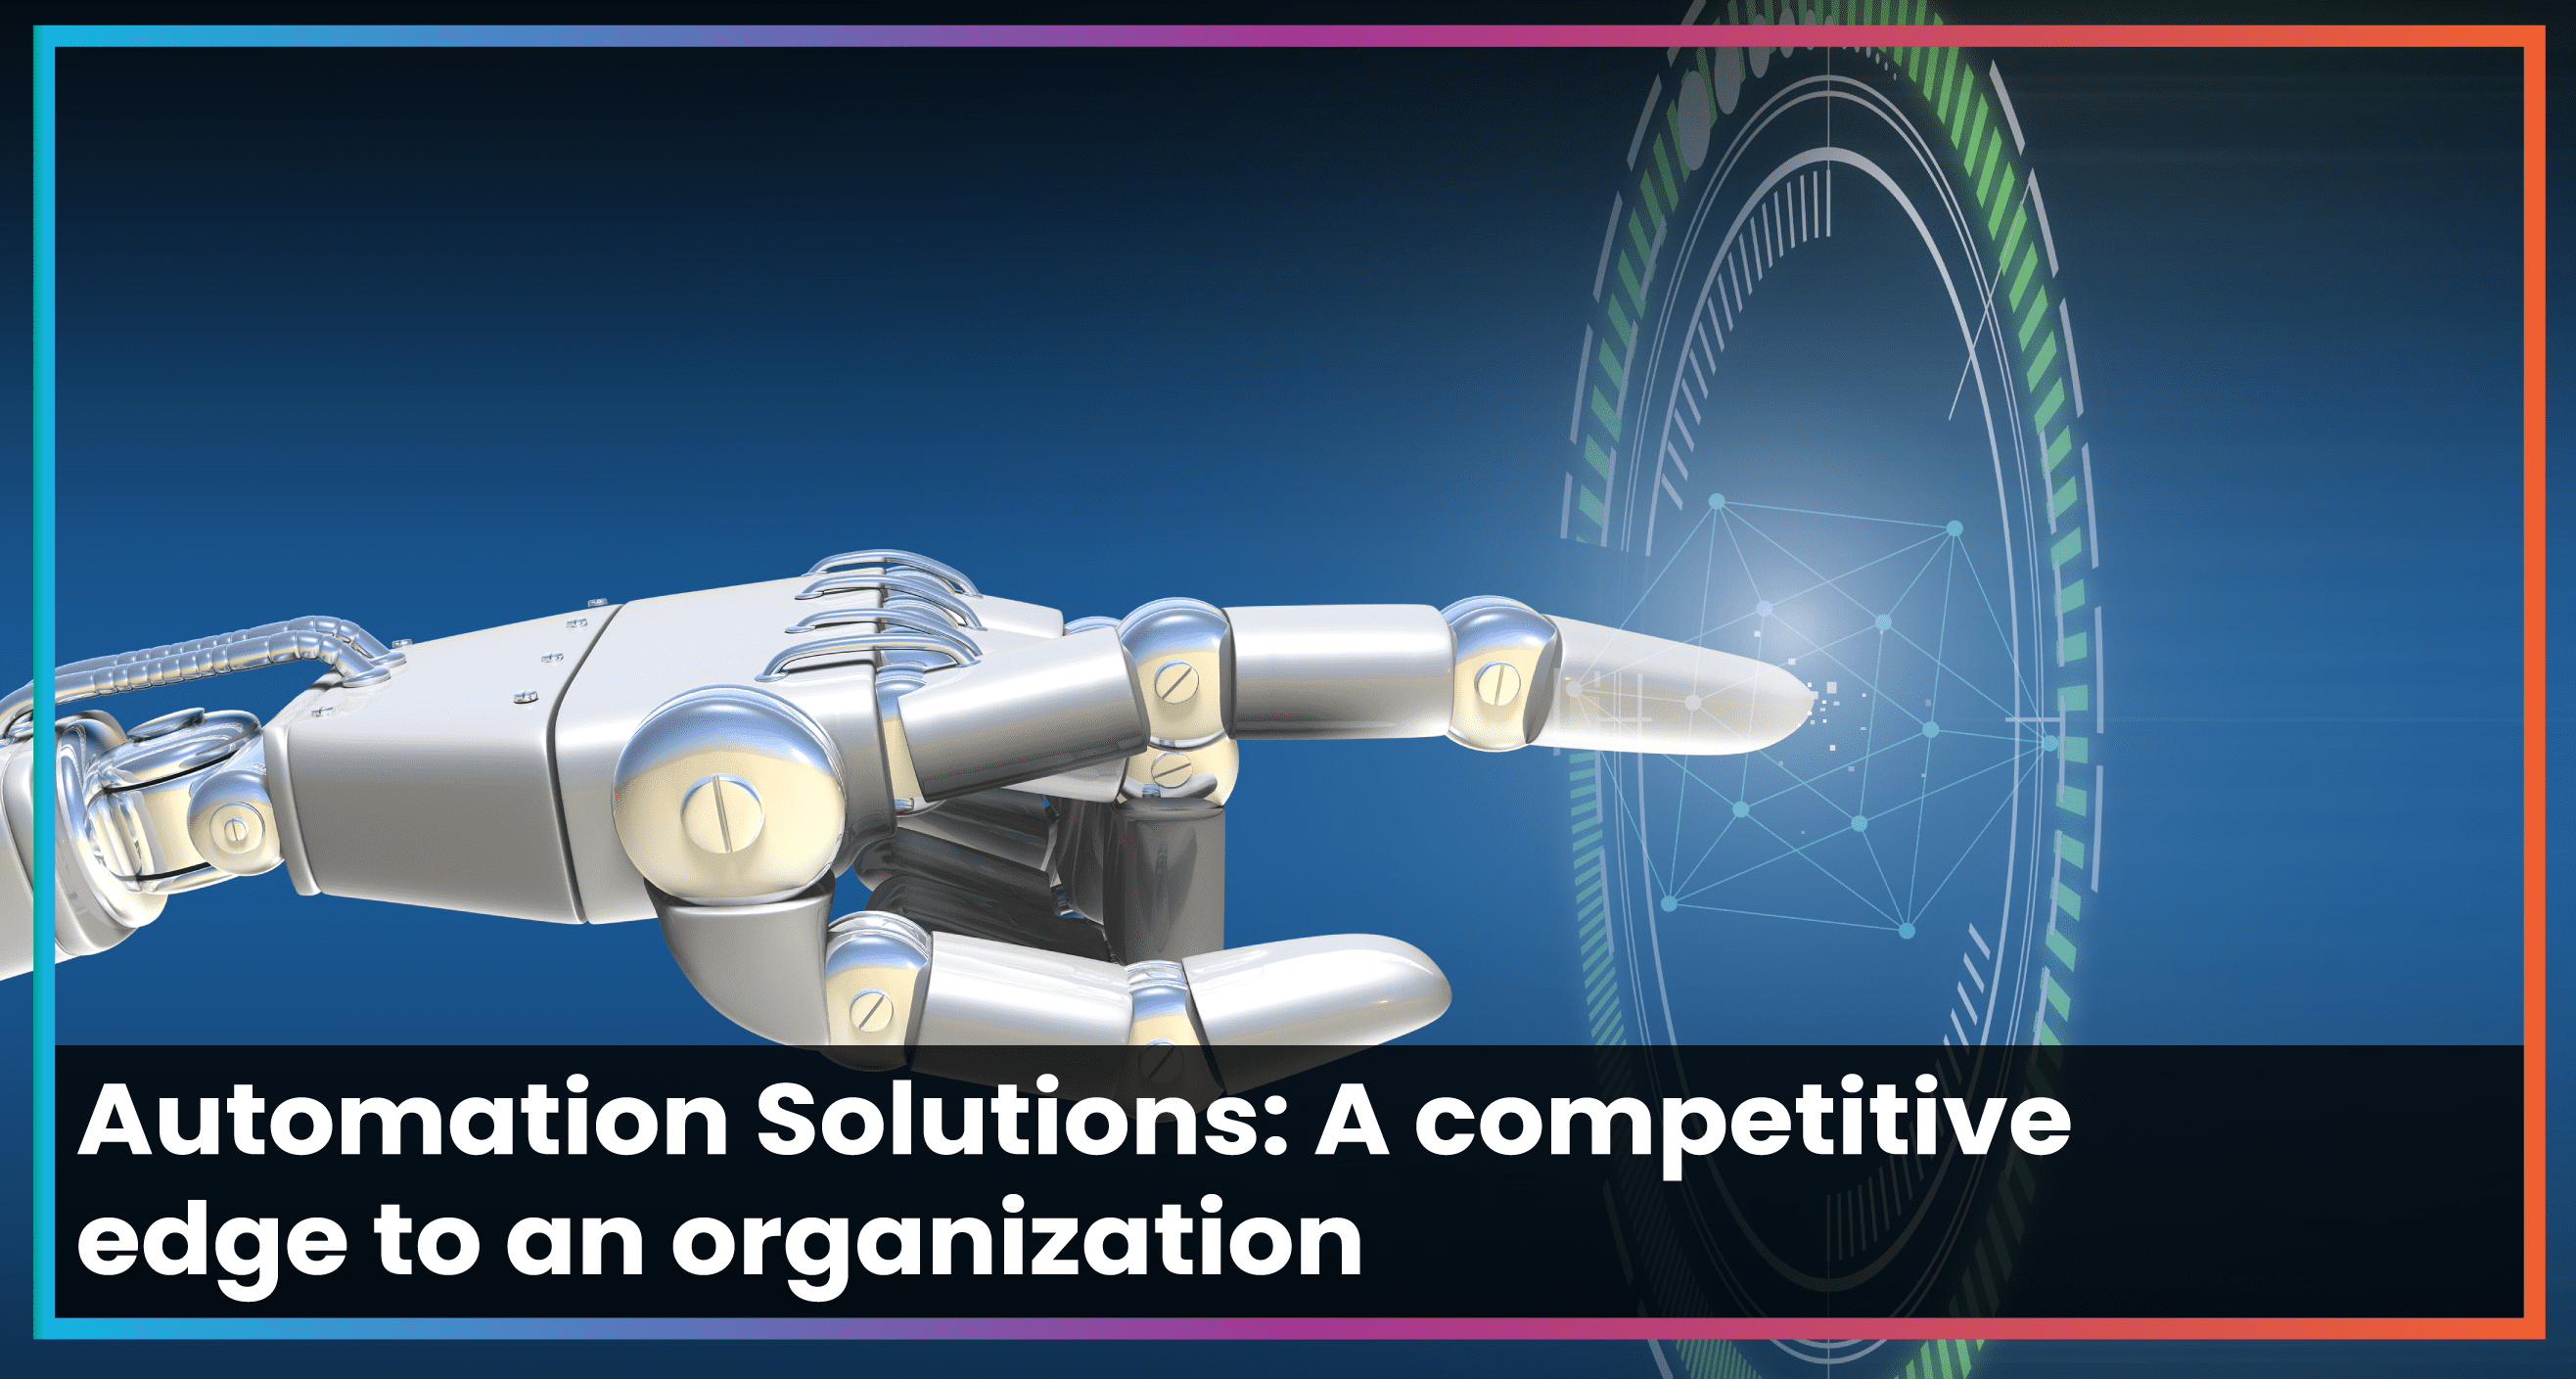 Automation Solutions: A competitive edge to an organization